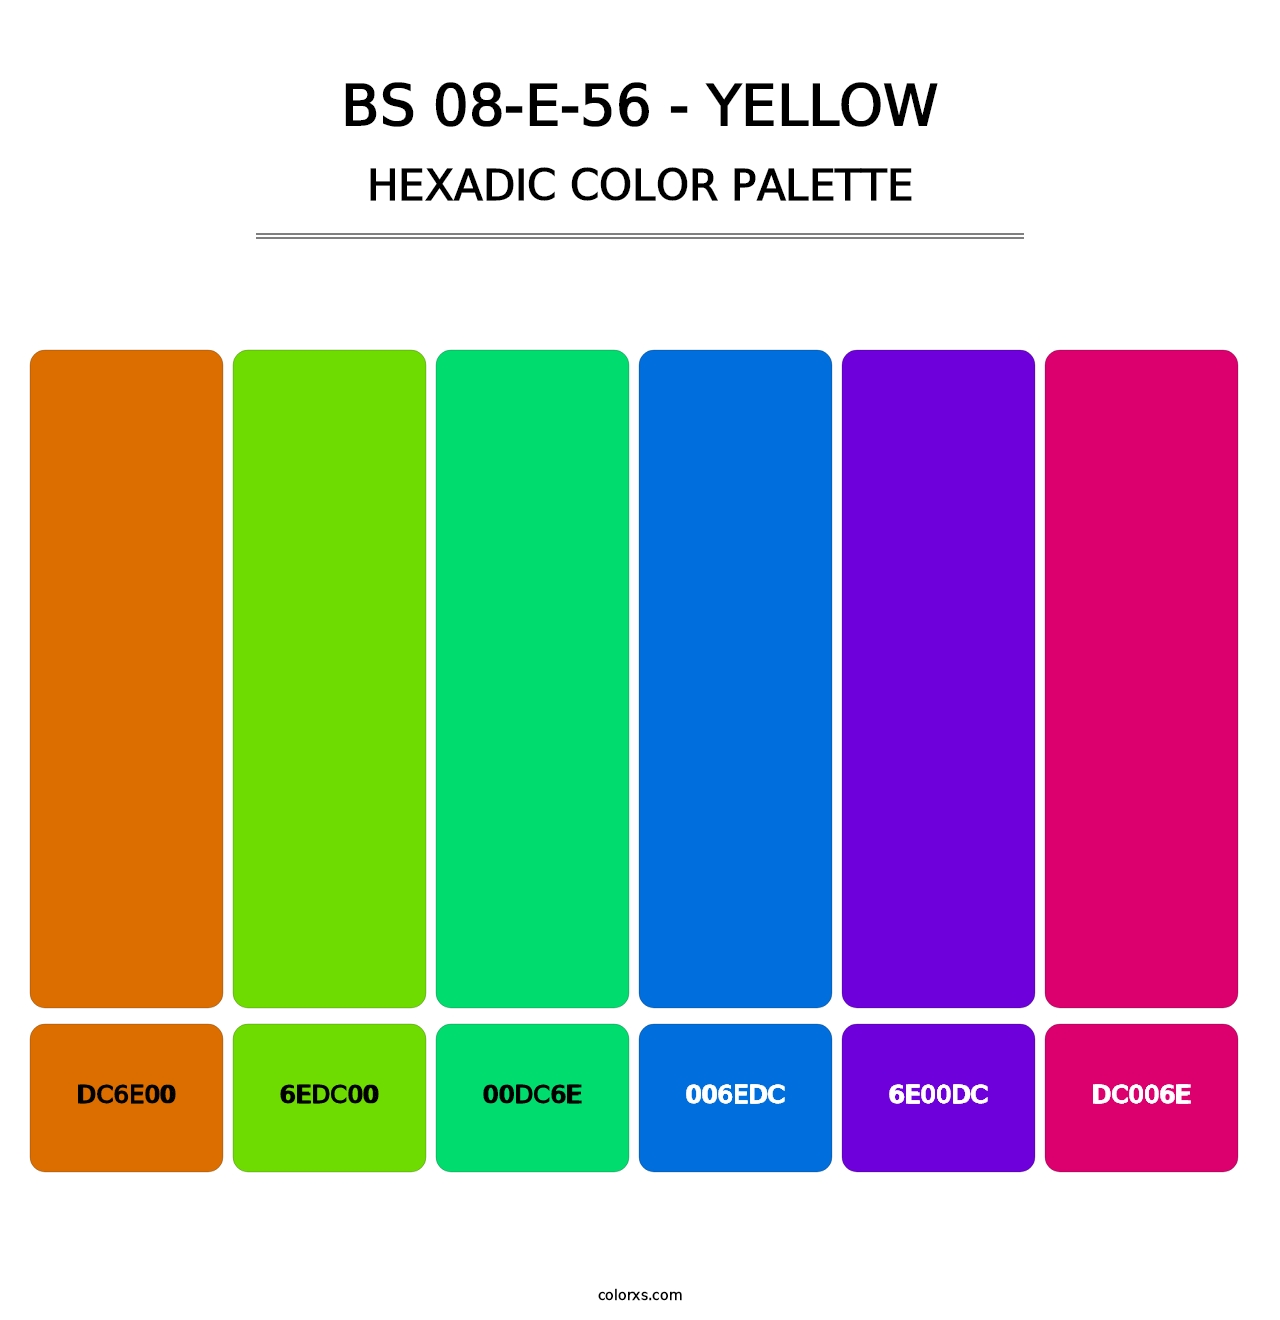 BS 08-E-56 - Yellow - Hexadic Color Palette